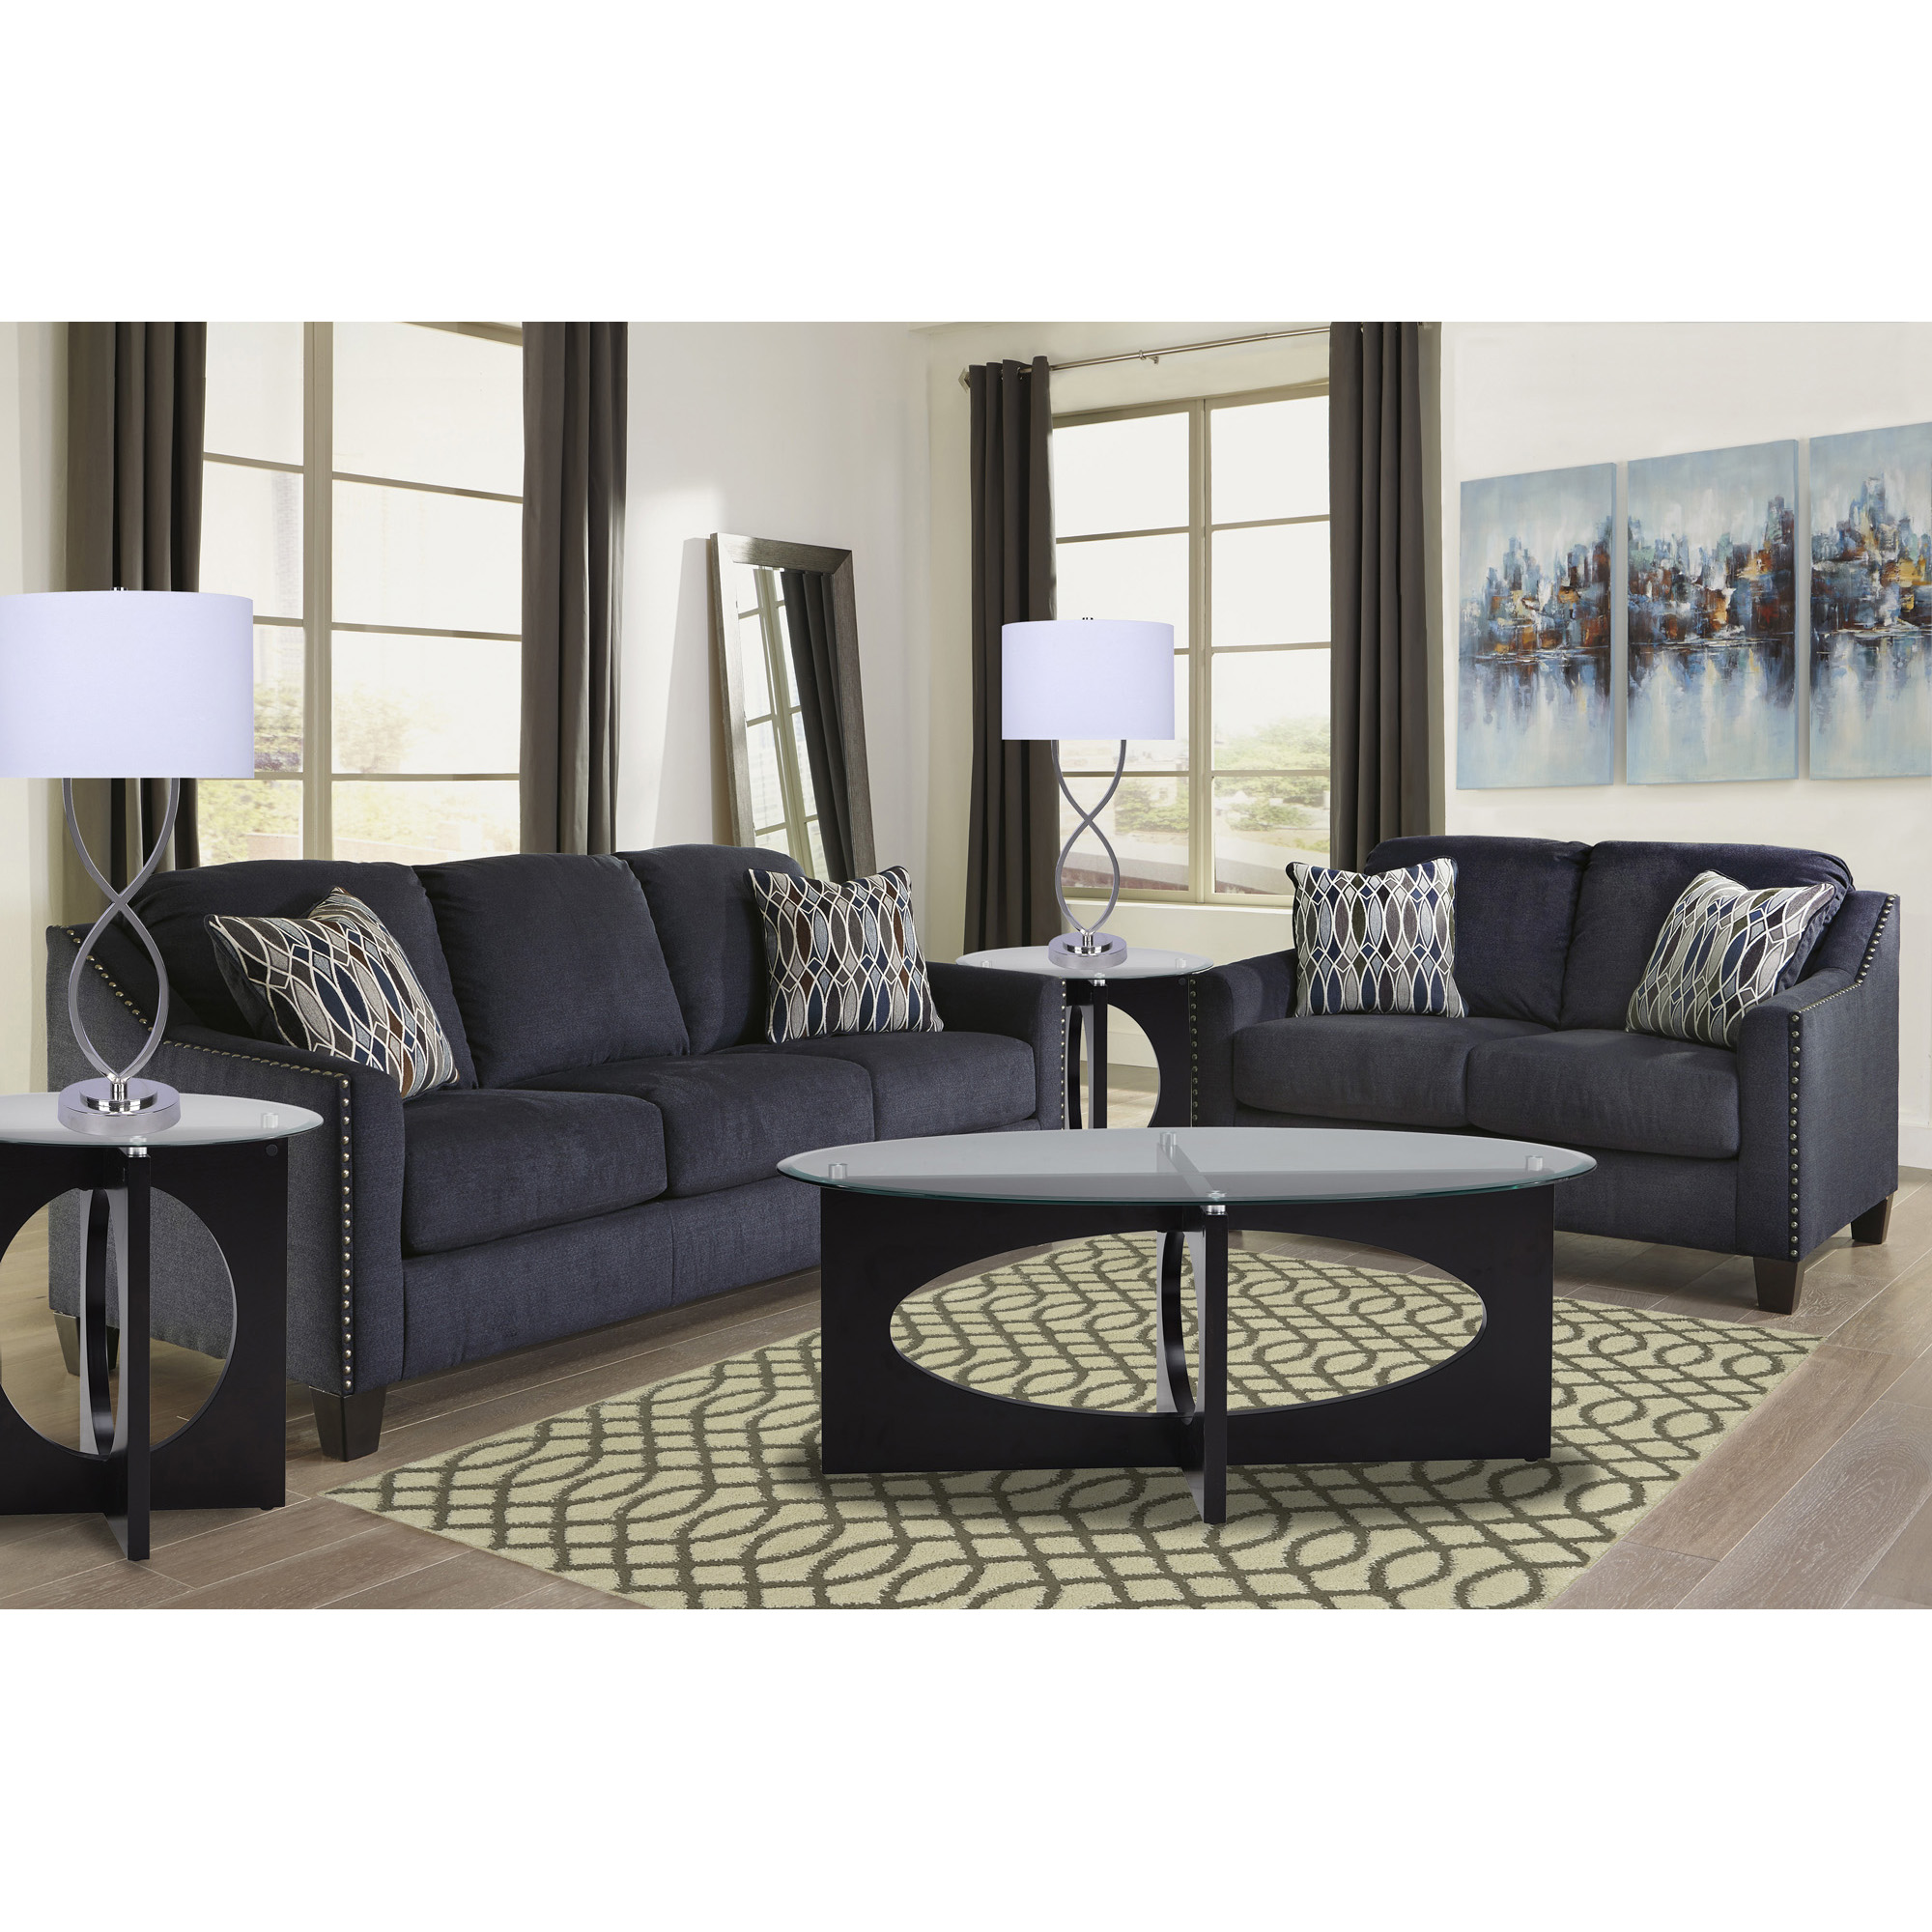 7-piece creeal heights living room collection